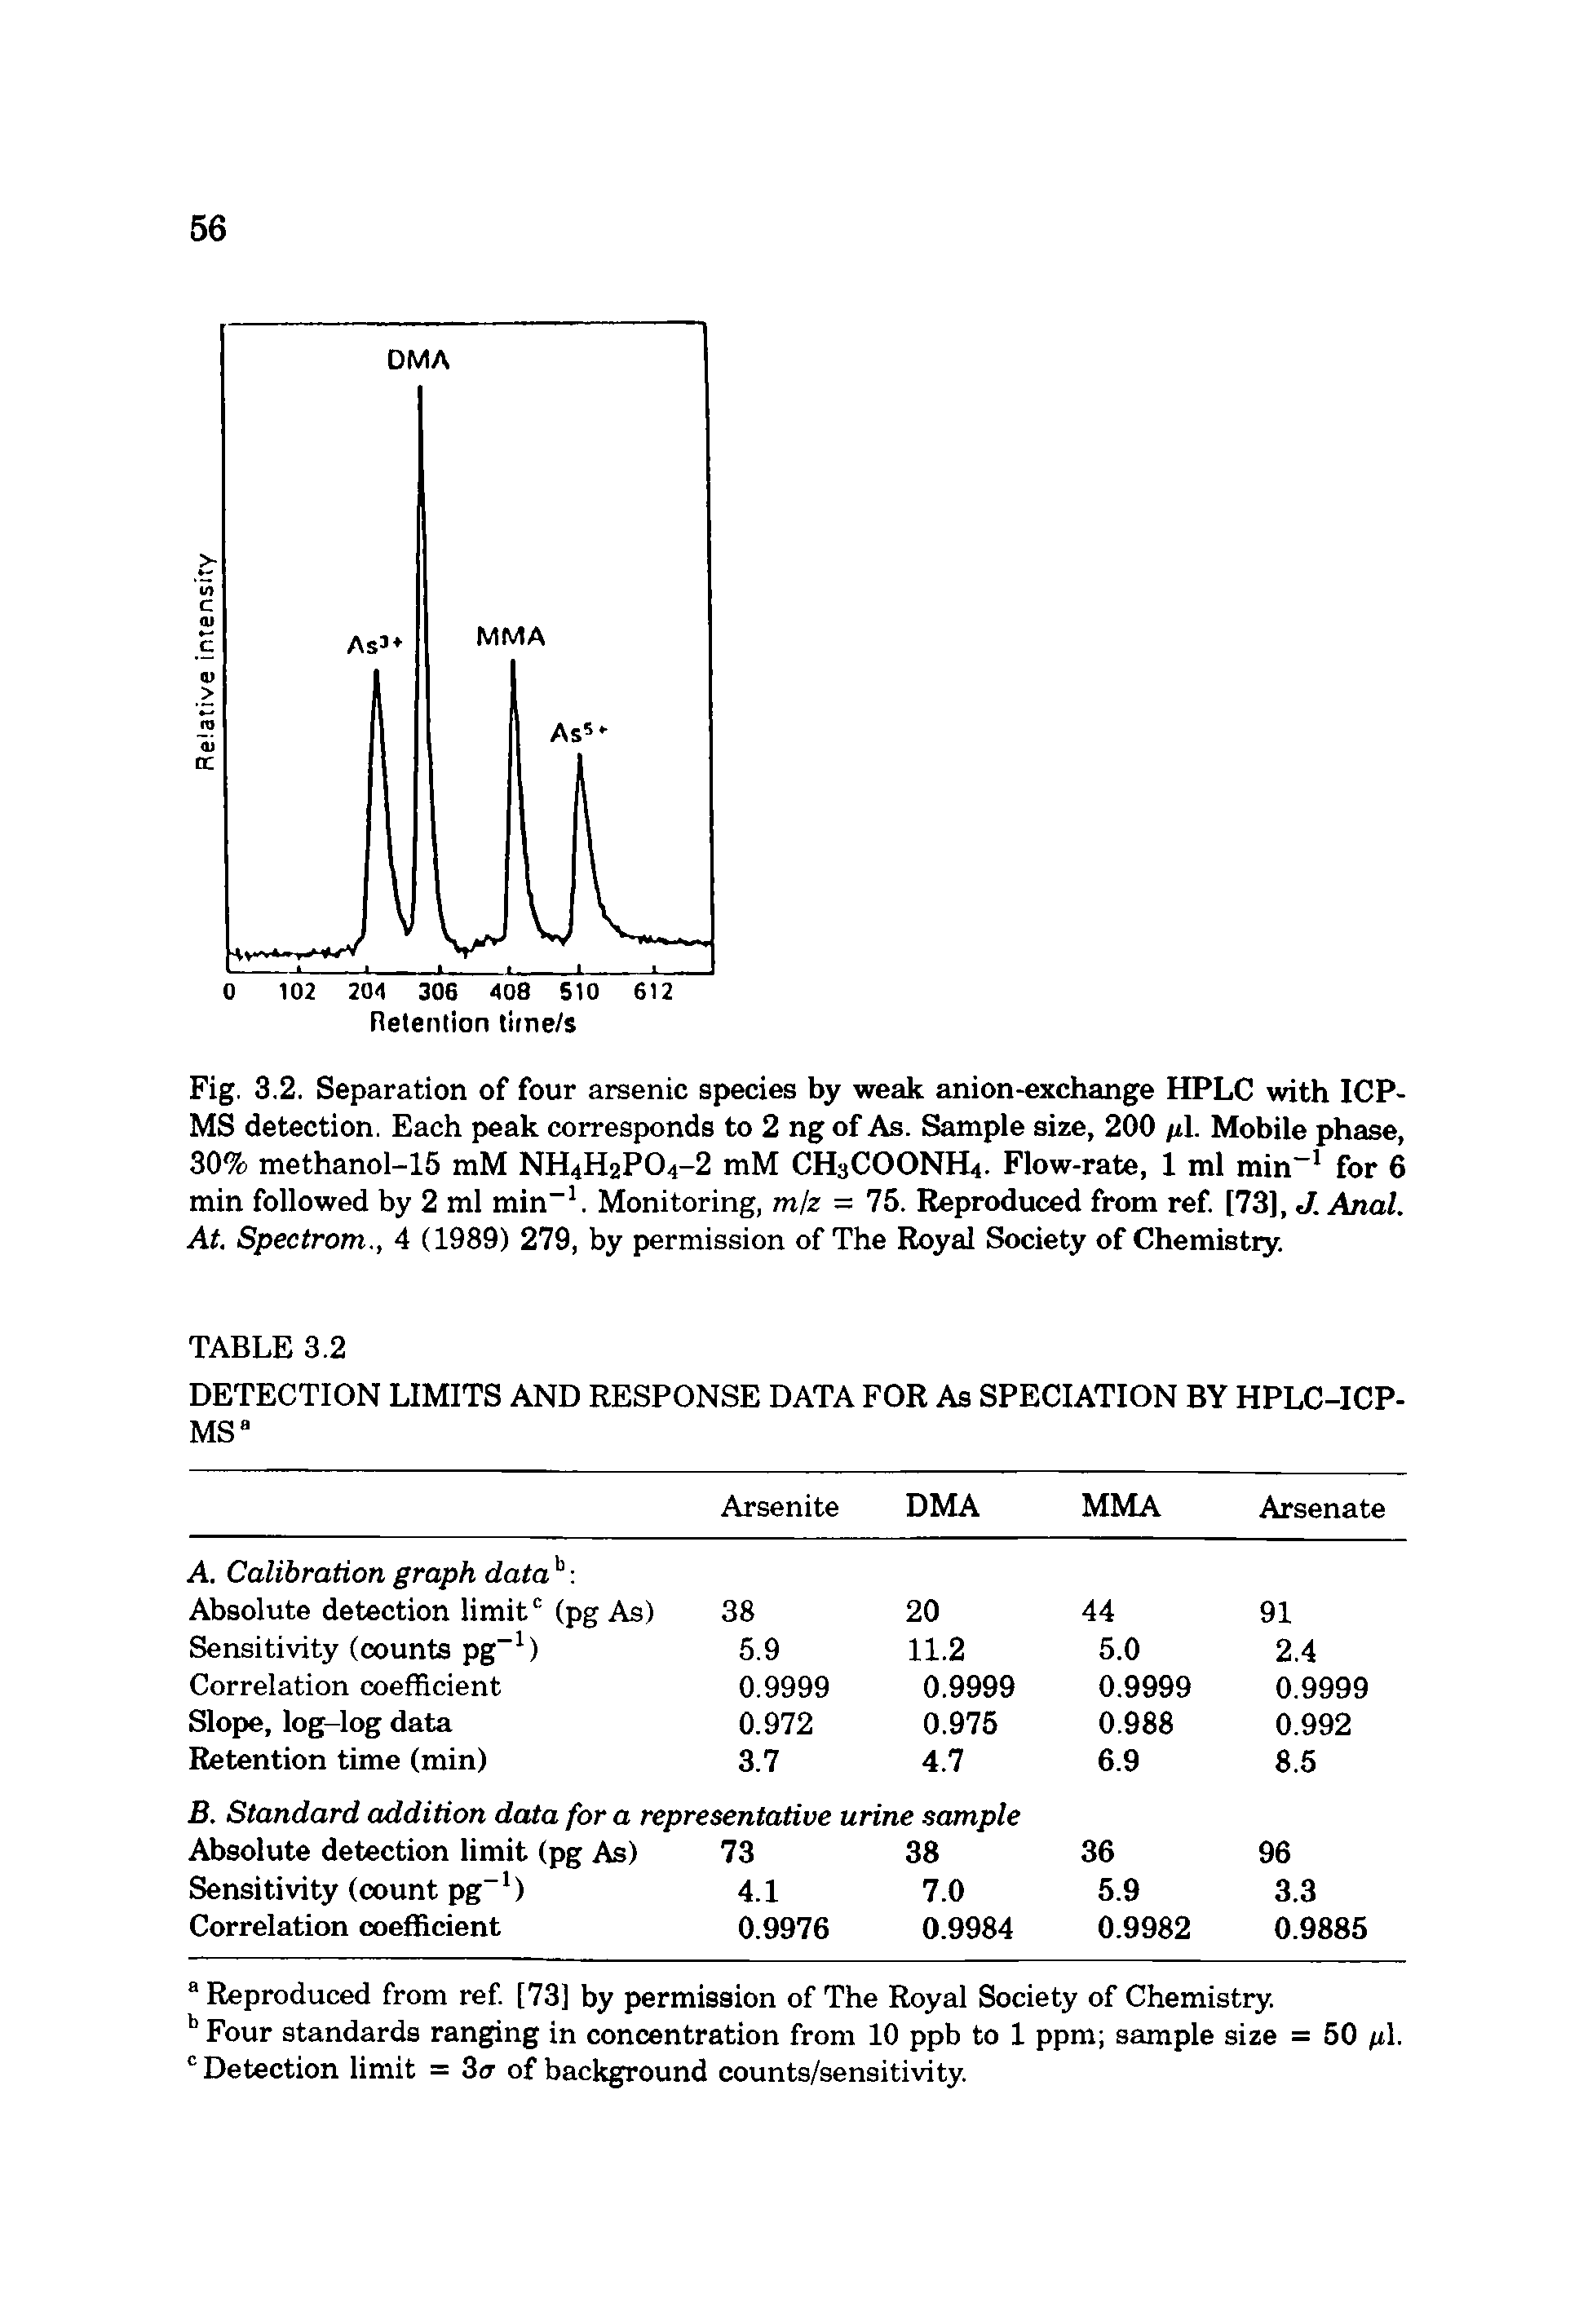 Fig. 3,2. Separation of four arsenic species by weak anion-exchange HPLC with ICP-MS detection. Each peak corresponds to 2 ng of As. Sample size, 200 /il. Mobile phase, 30% methanol-15 mM NH4H2PO4-2 mM CH3COONH4. Flow-rate, 1 ml min for 6 min followed by 2 ml min . Monitoring, miz = 75. Reproduced from ref (73), J. Anal. At. Spectrom., 4 (1989) 279, by permission of The Royal Society of Chemistiy.